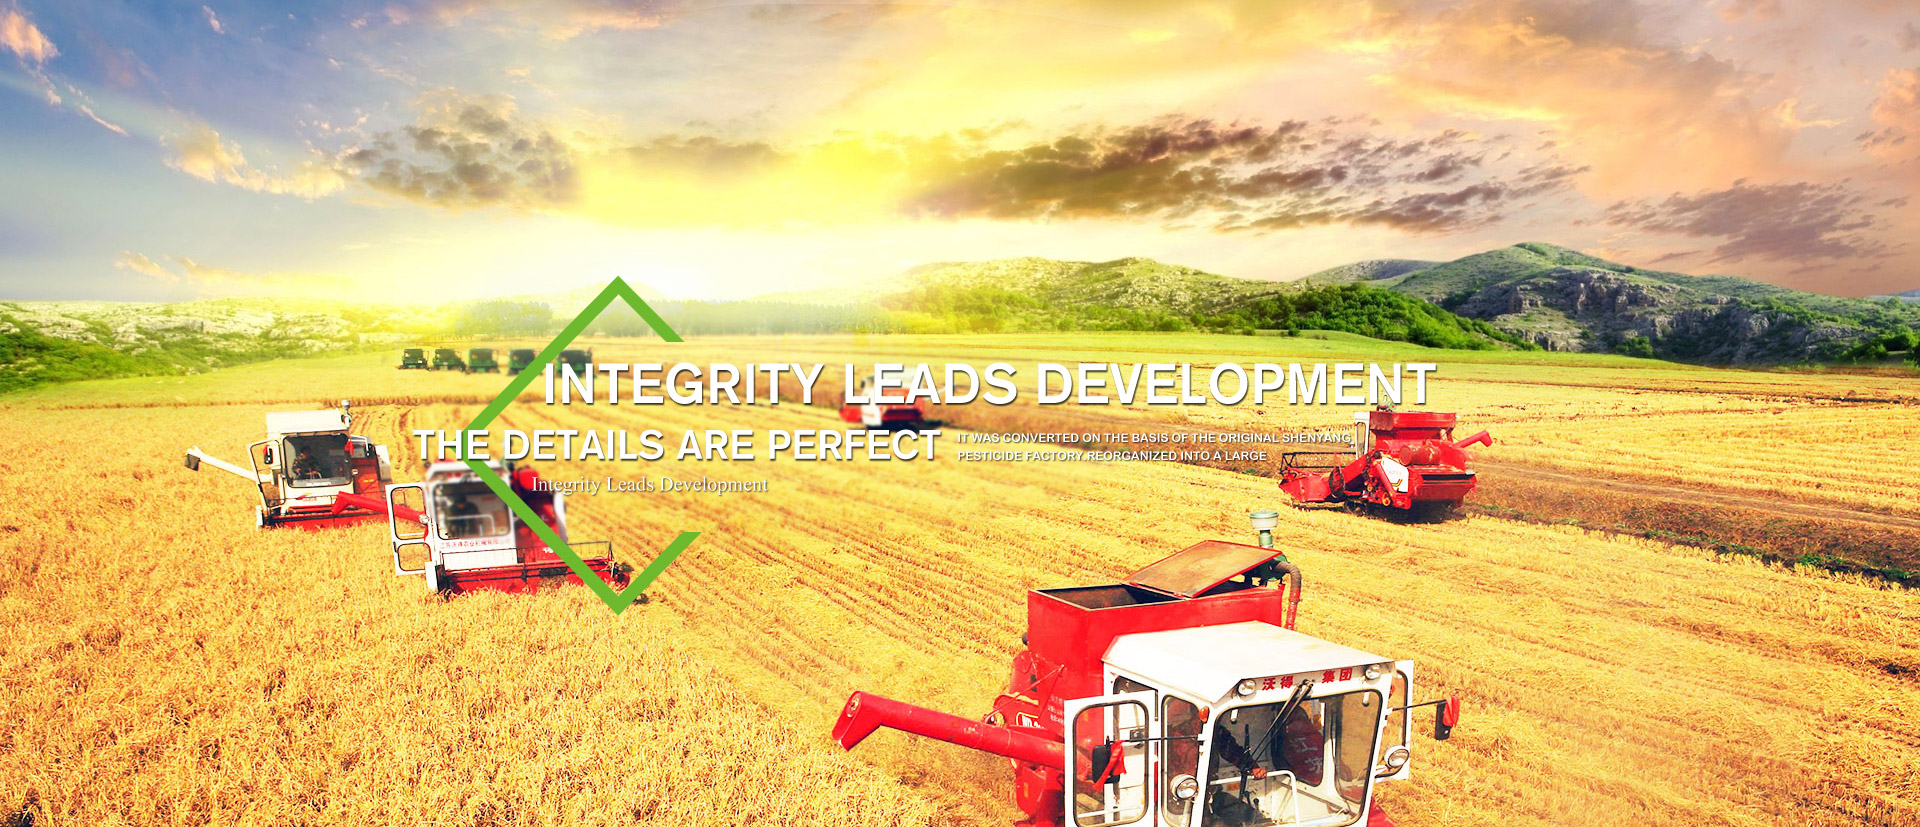 Integrity leads development, detail is perfect